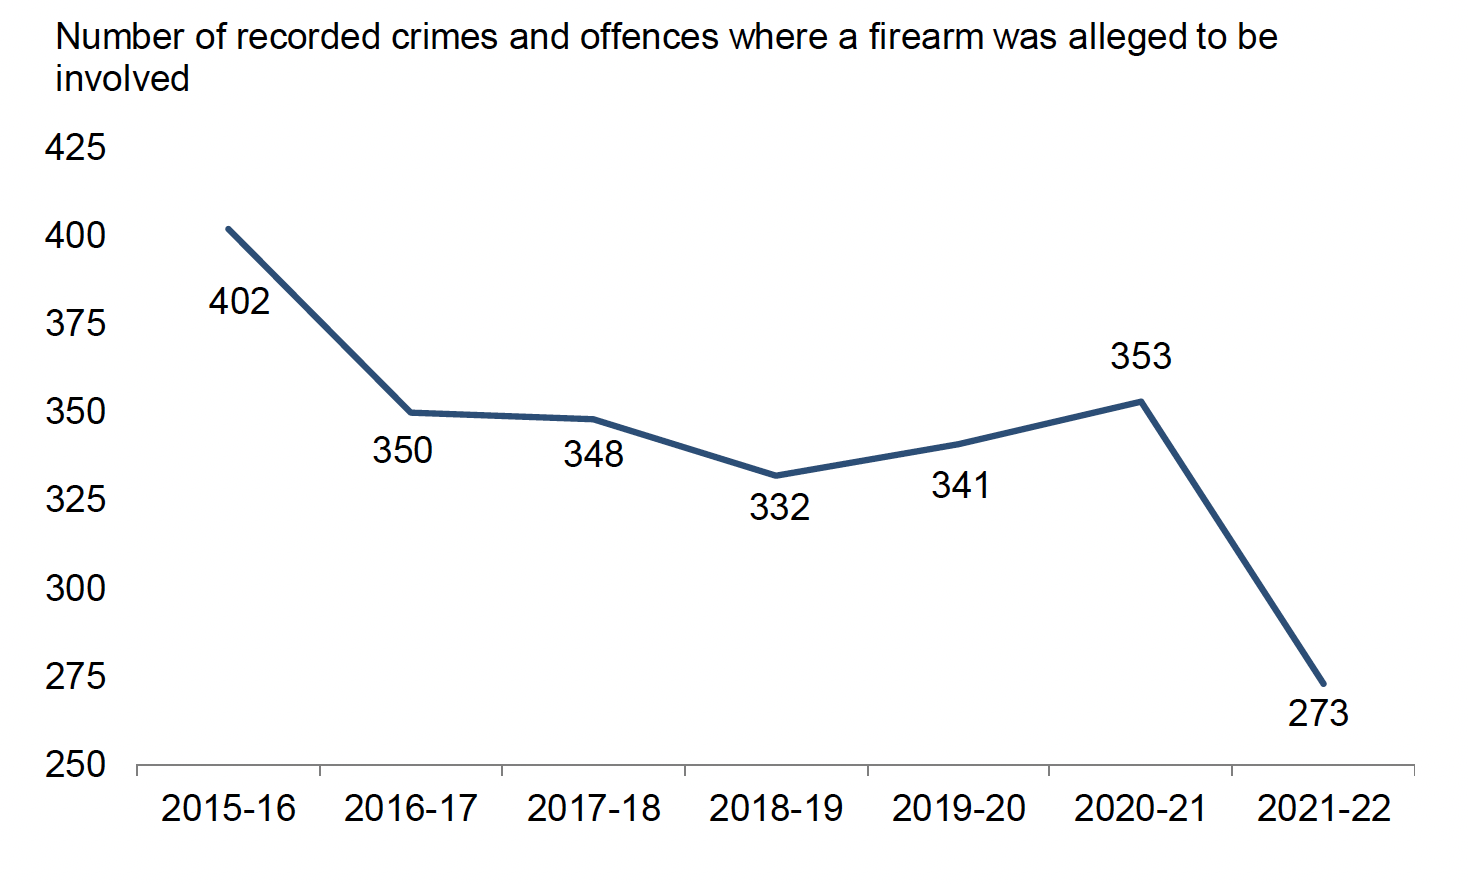 Number of recorded crimes and offences where a firearm was alleged to be involved, 2015-16 to 2021-22. Last updated December 2023.